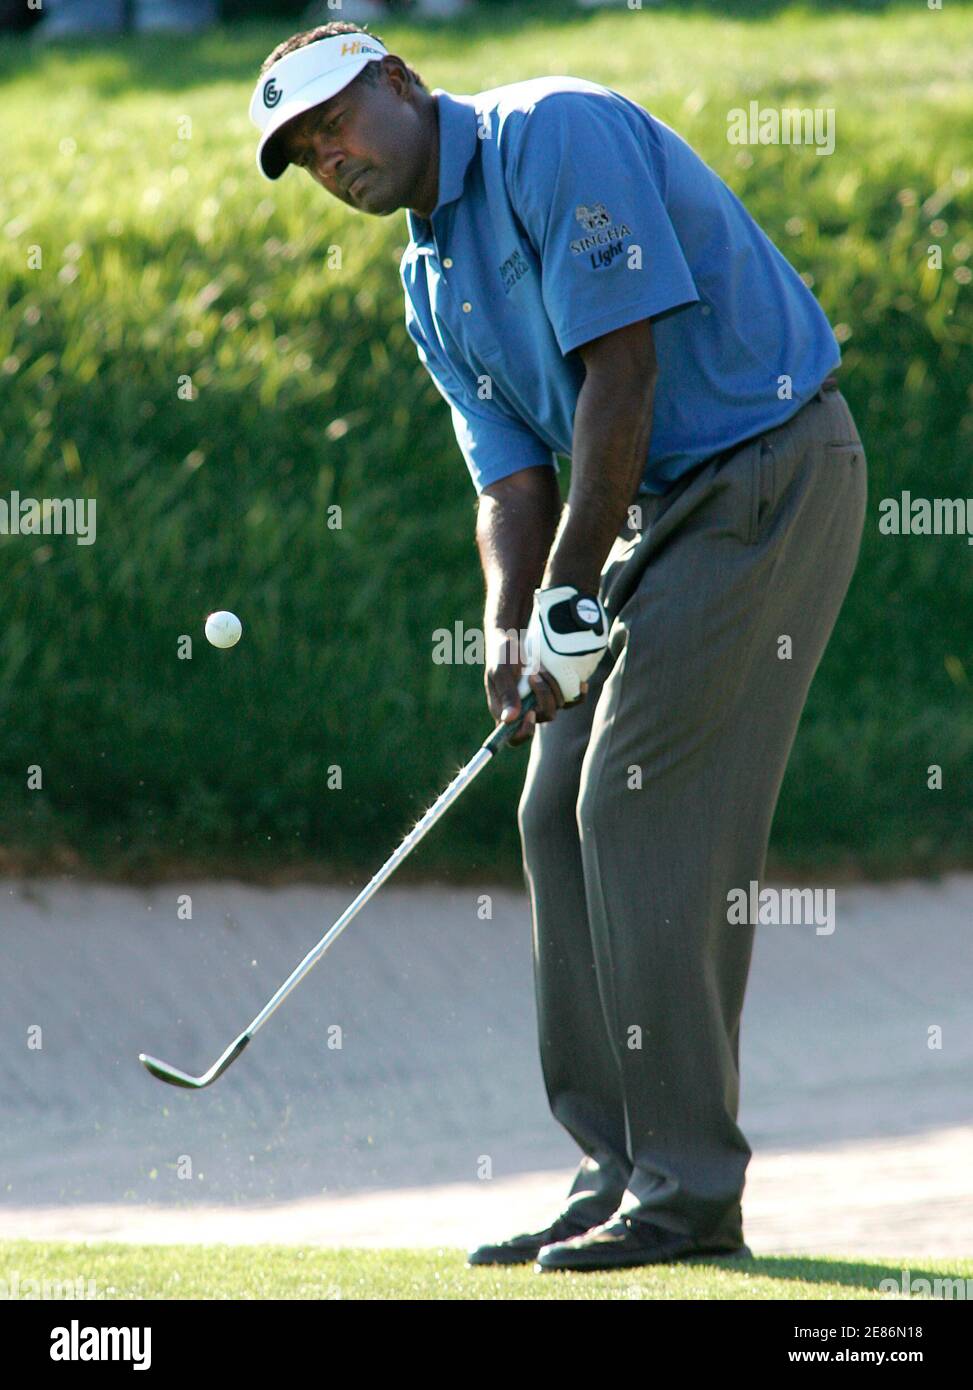 Vijay Singh of Fiji chips onto the 18th green during the fourth round of the Arnold Palmer Invitational golf tournament at the Bay Hill Club in Orlando, Florida, March 18, 2007. Singh won the tournament and finished at eight-under-par with a score of 272.  REUTERS/Rick Fowler (UNITED STATES) Stock Photo